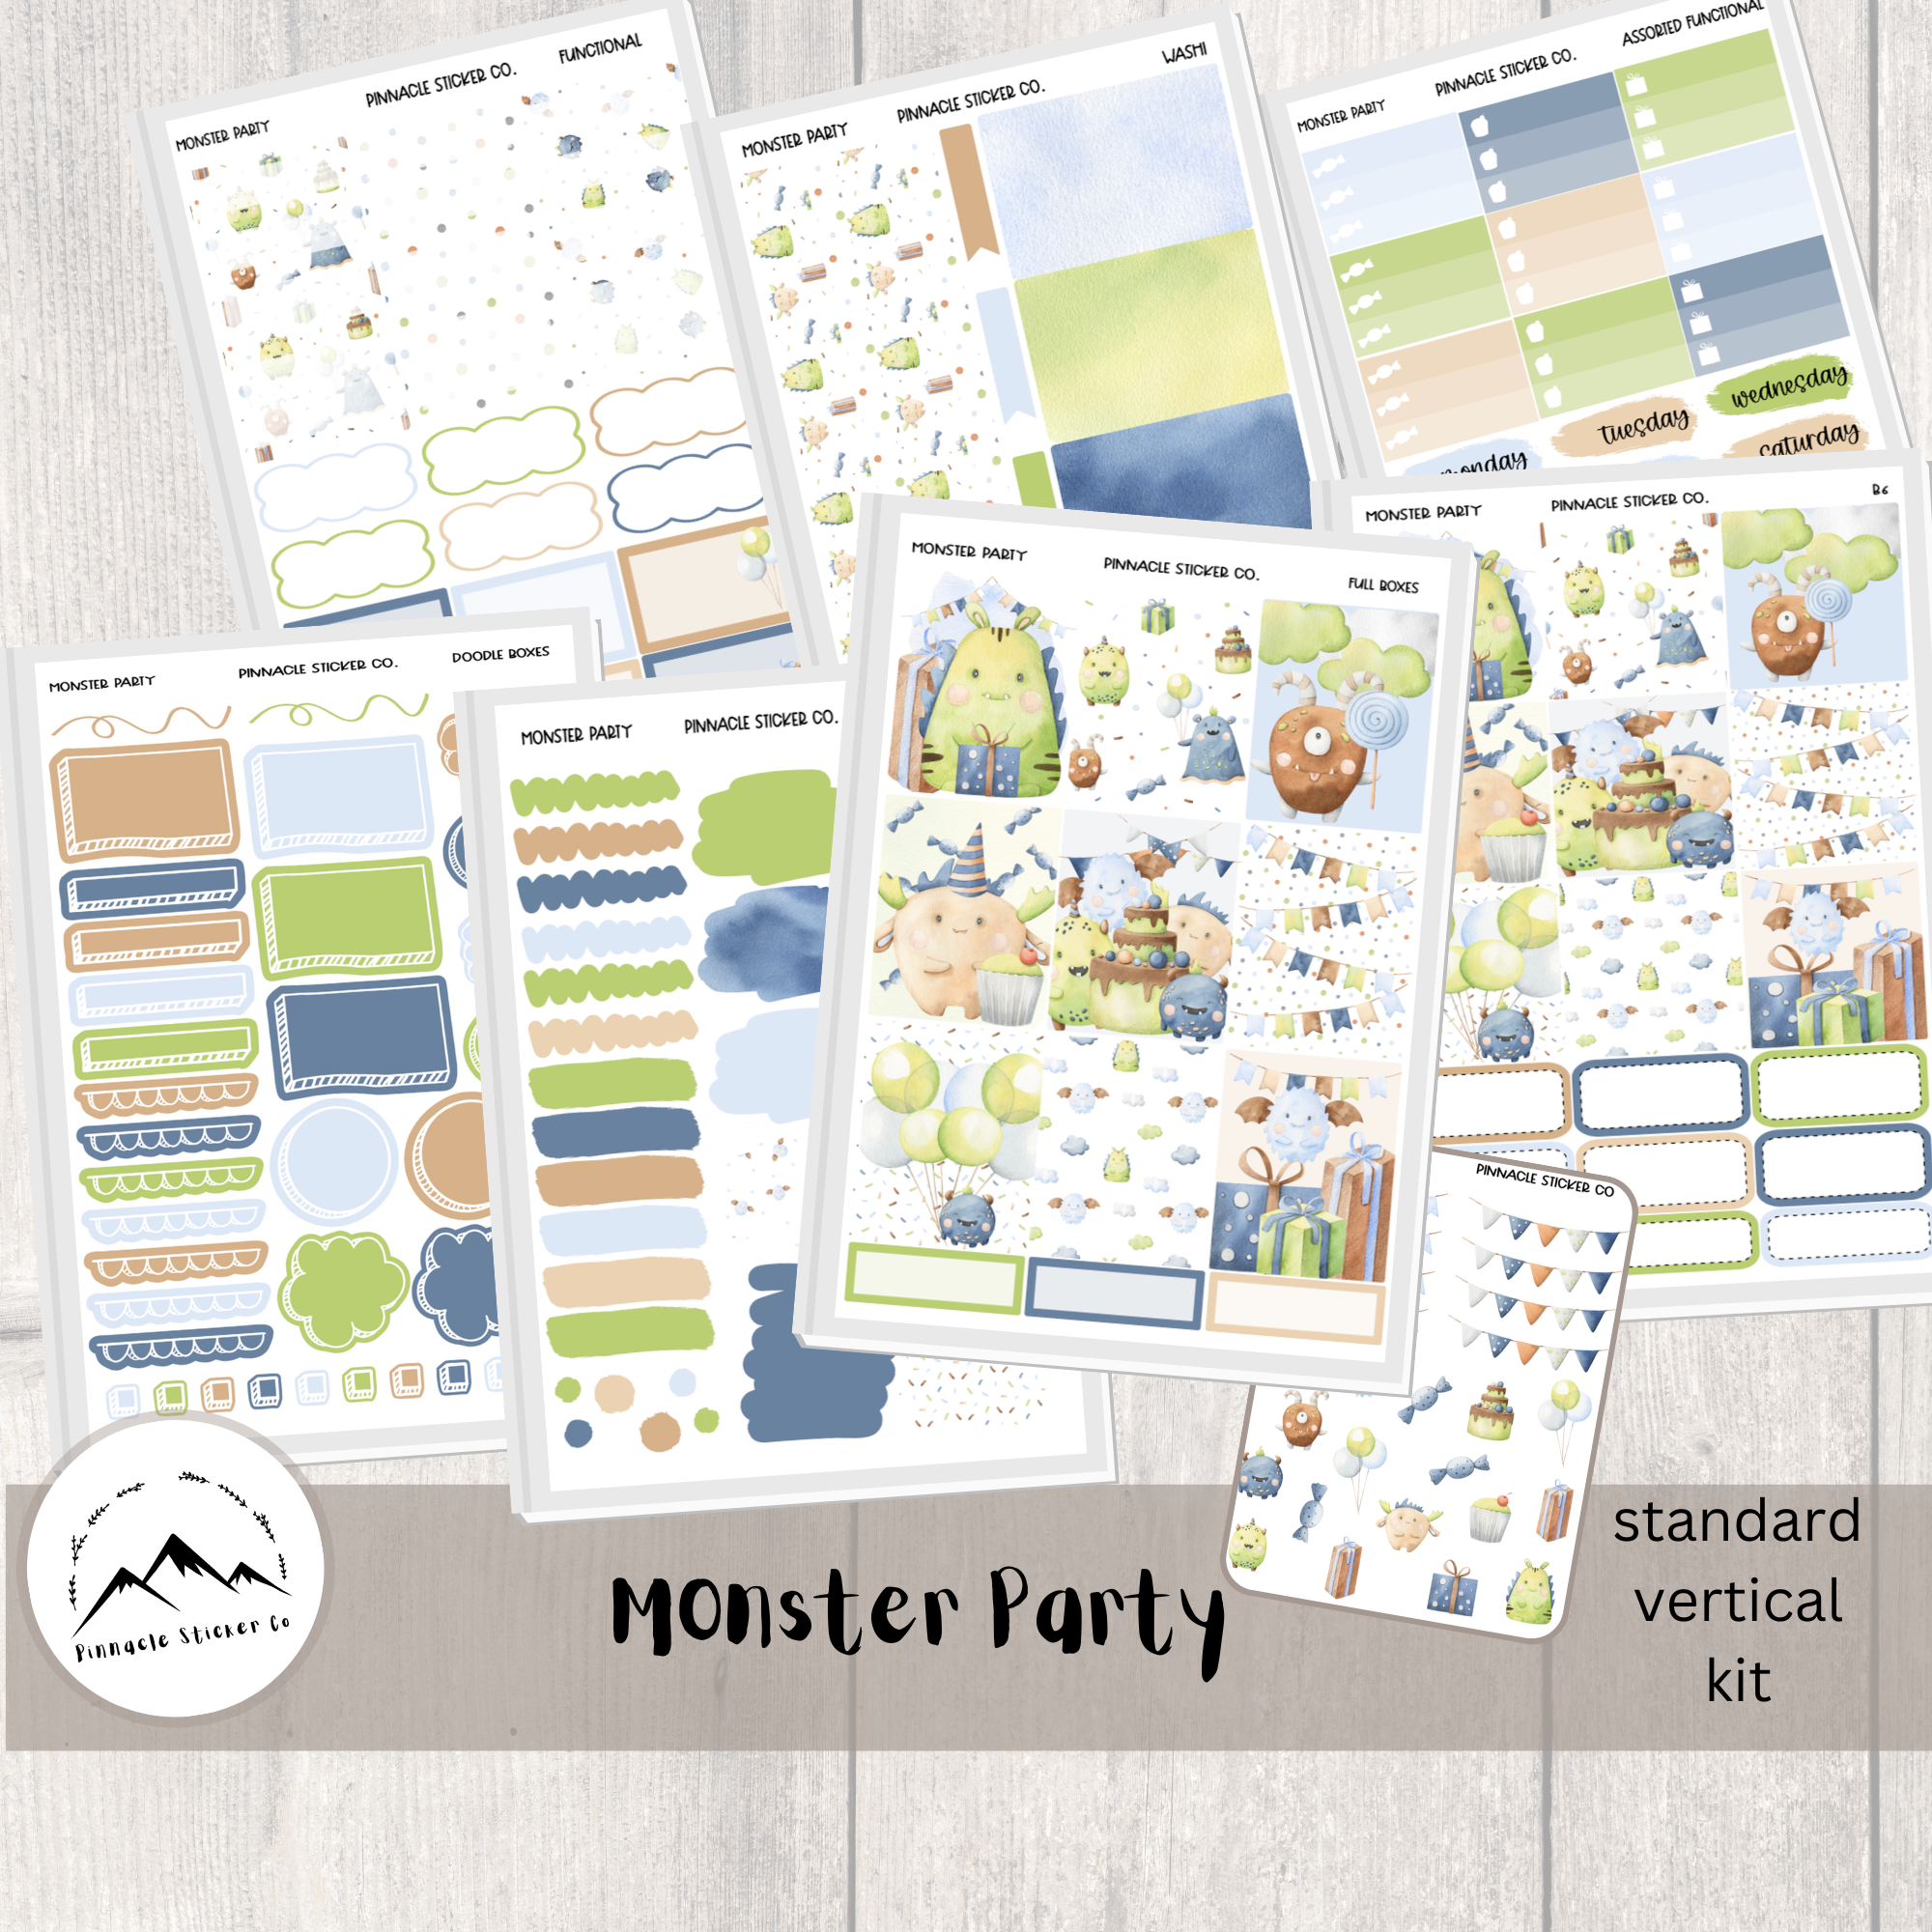 Monster Party Daily Planner Stickers – Pinnacle Sticker Co